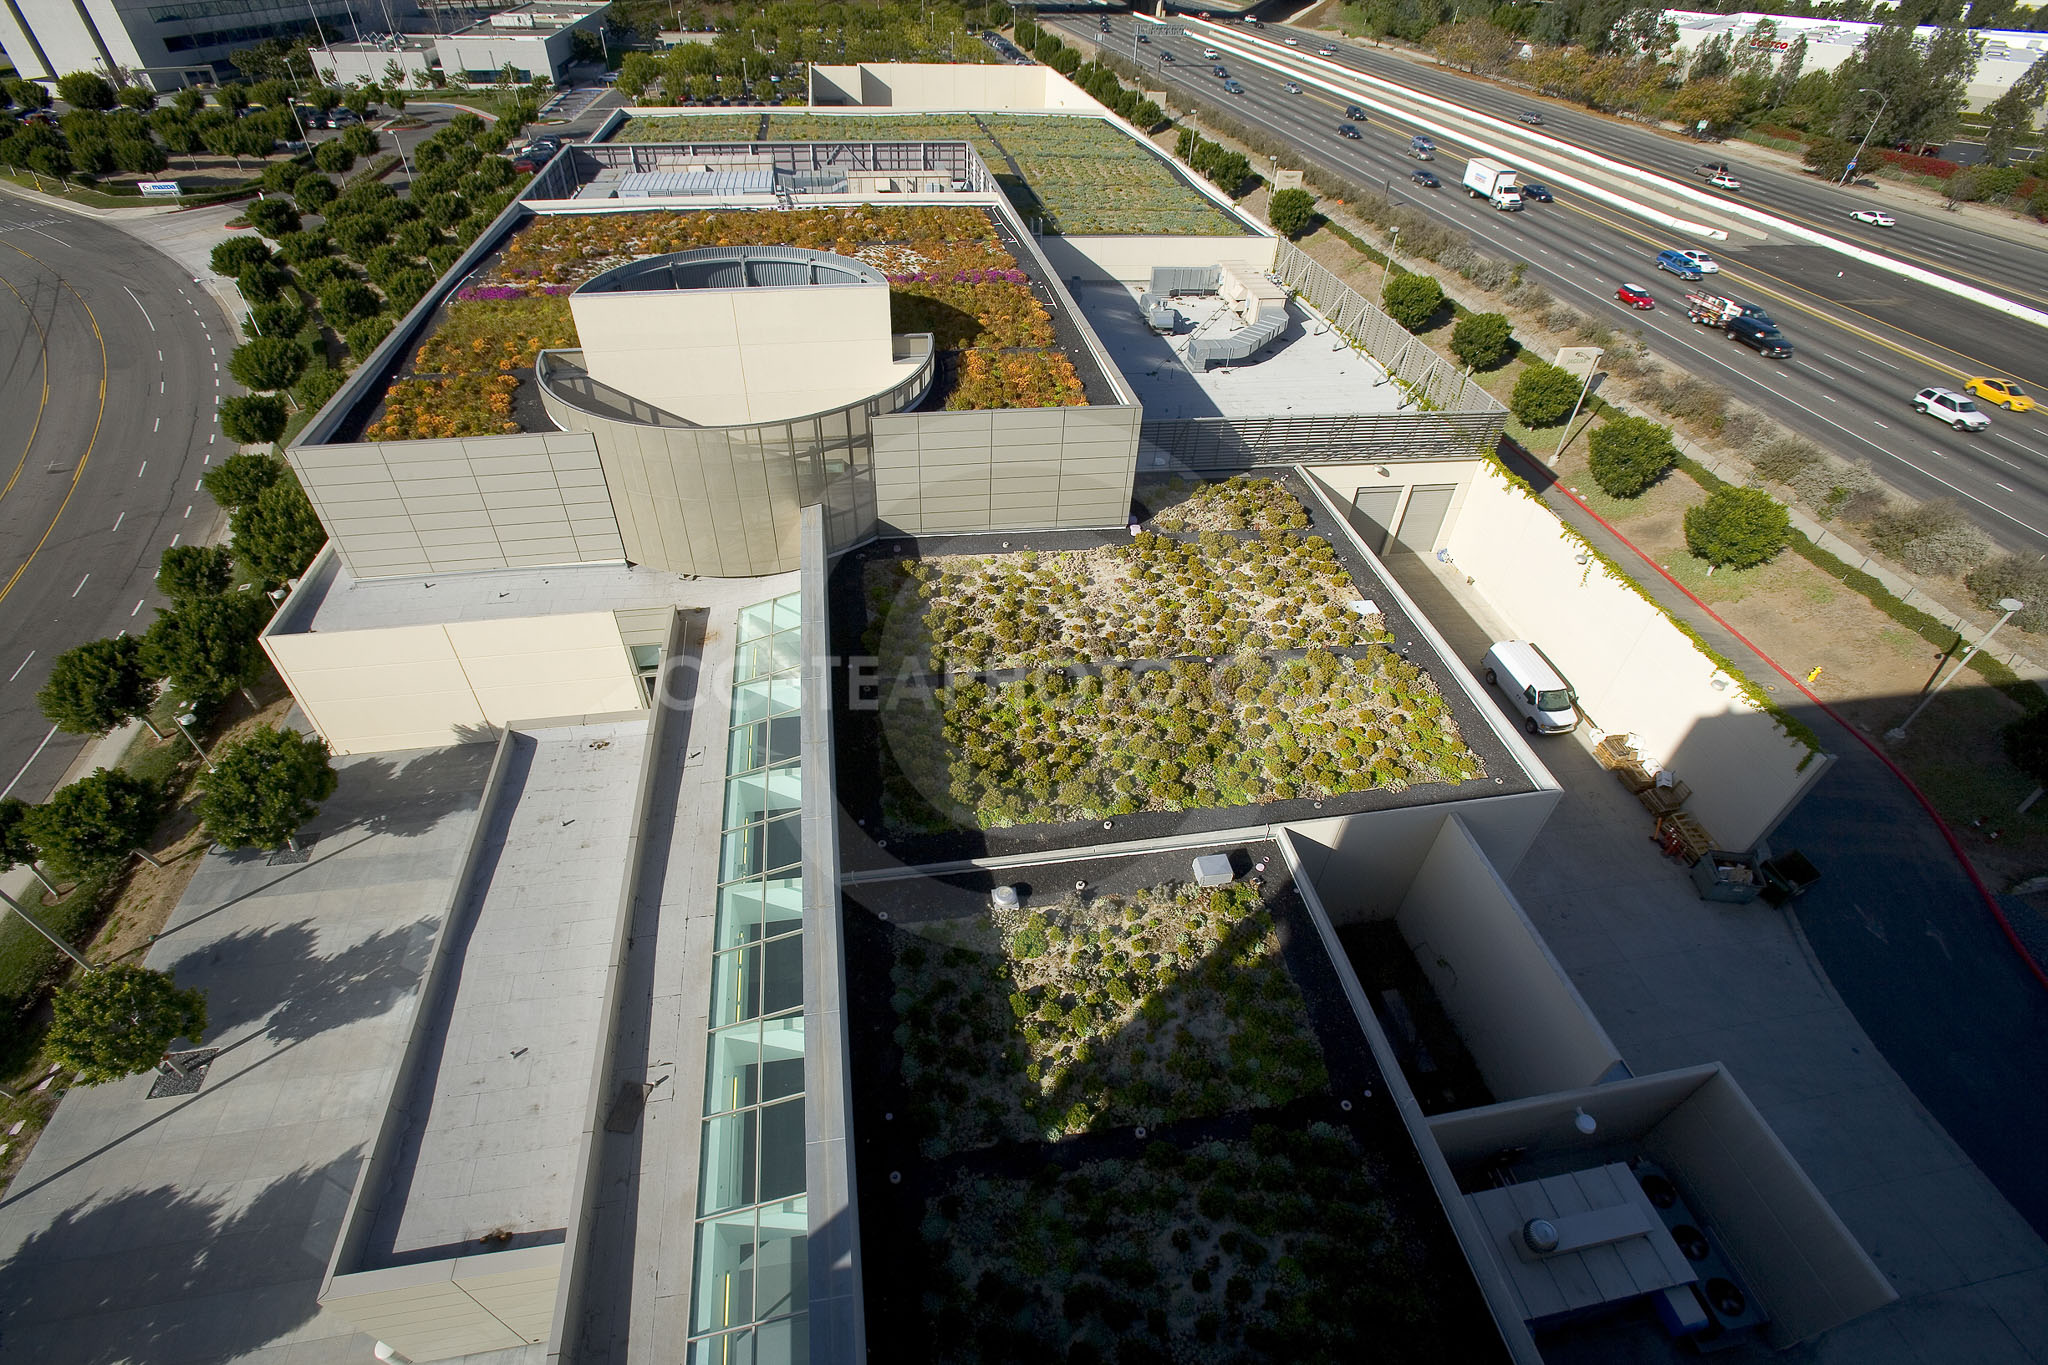 PAG Green Roof 019